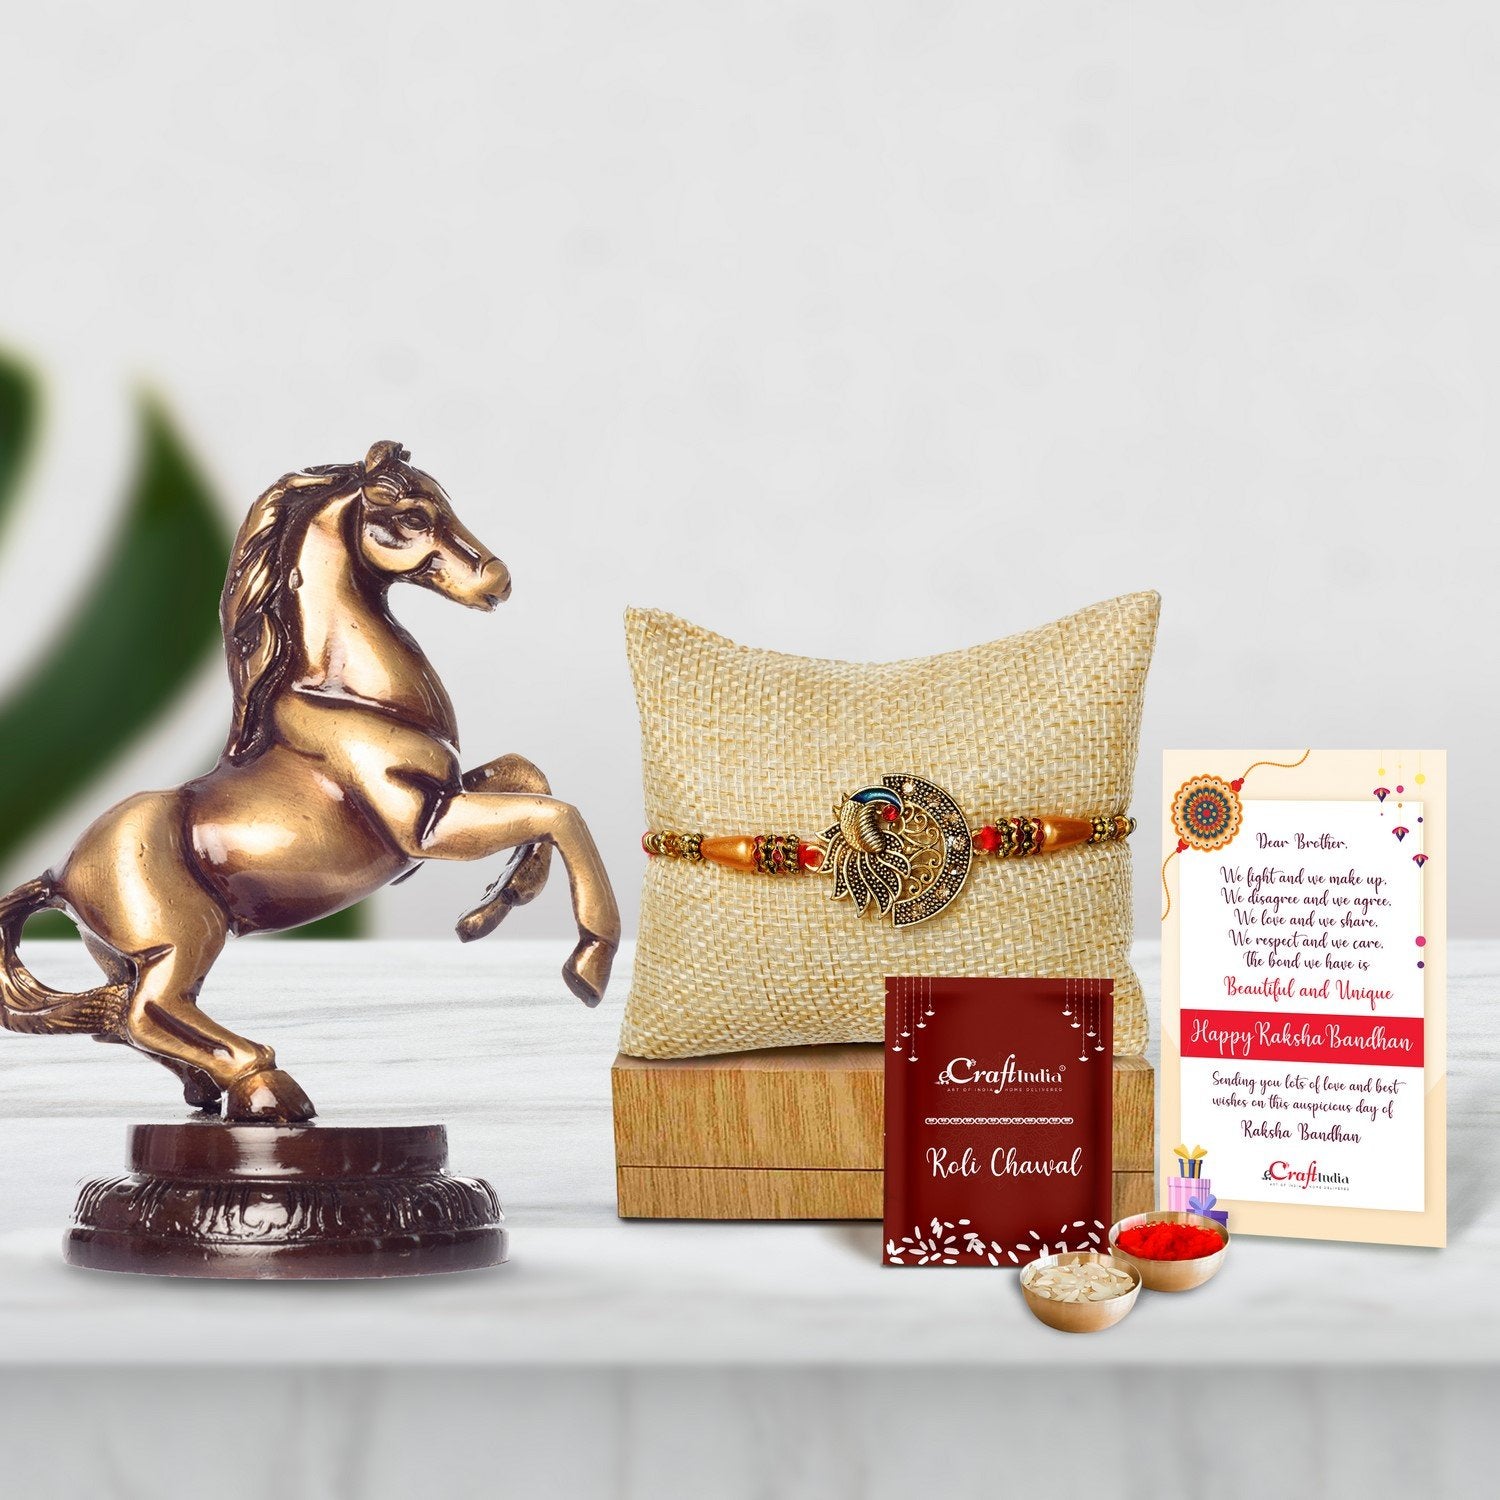 Designer Peacock Rakhi with Brass Horse Tableware Antique Showpiece and Roli Chawal Pack, Best Wishes Greeting Card